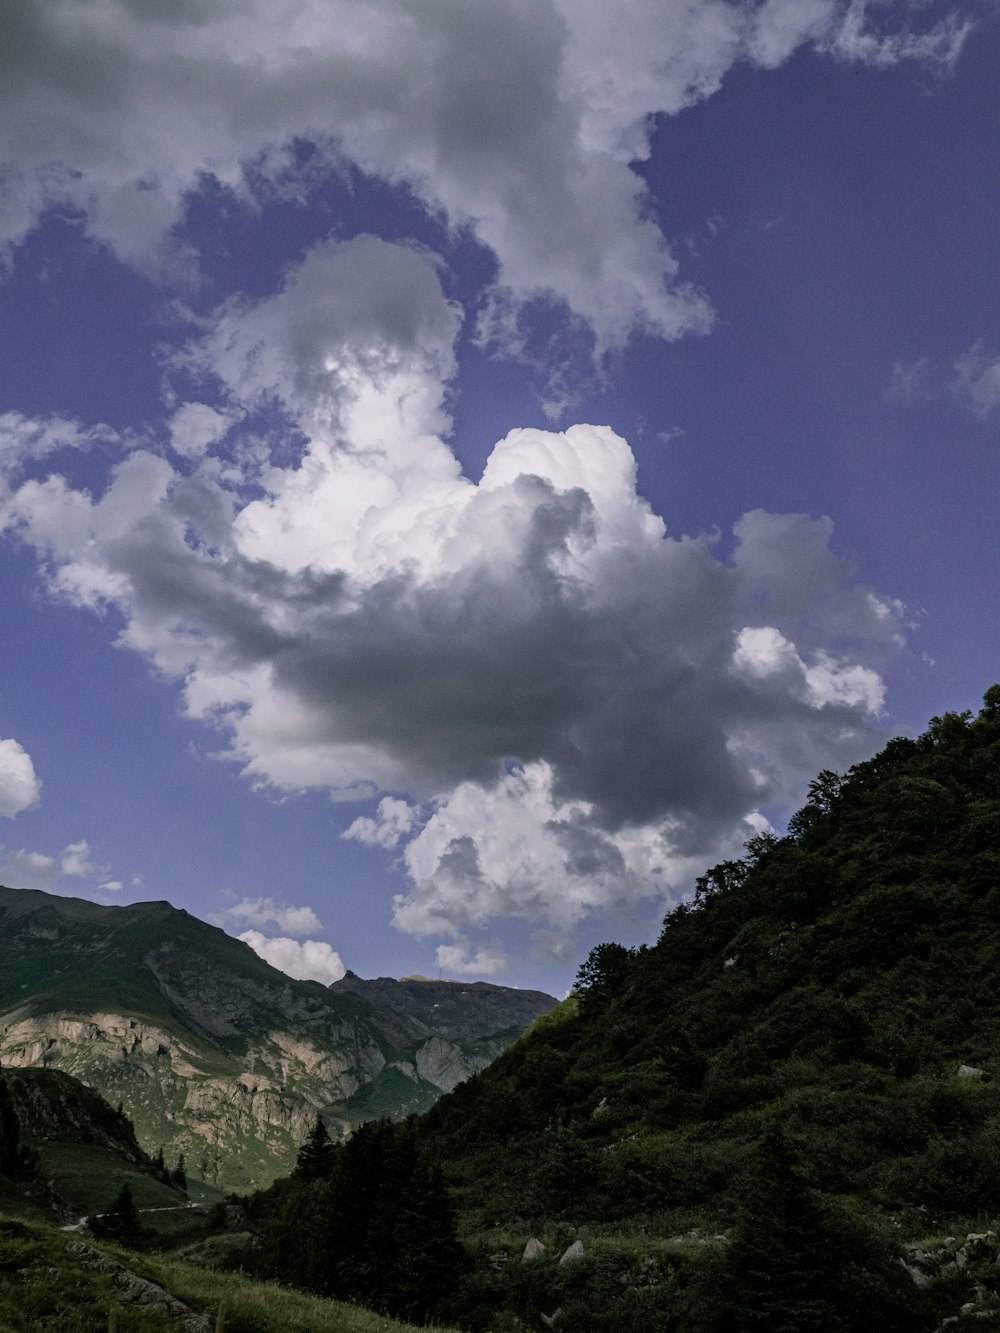 green mountain under white clouds and blue sky during daytime